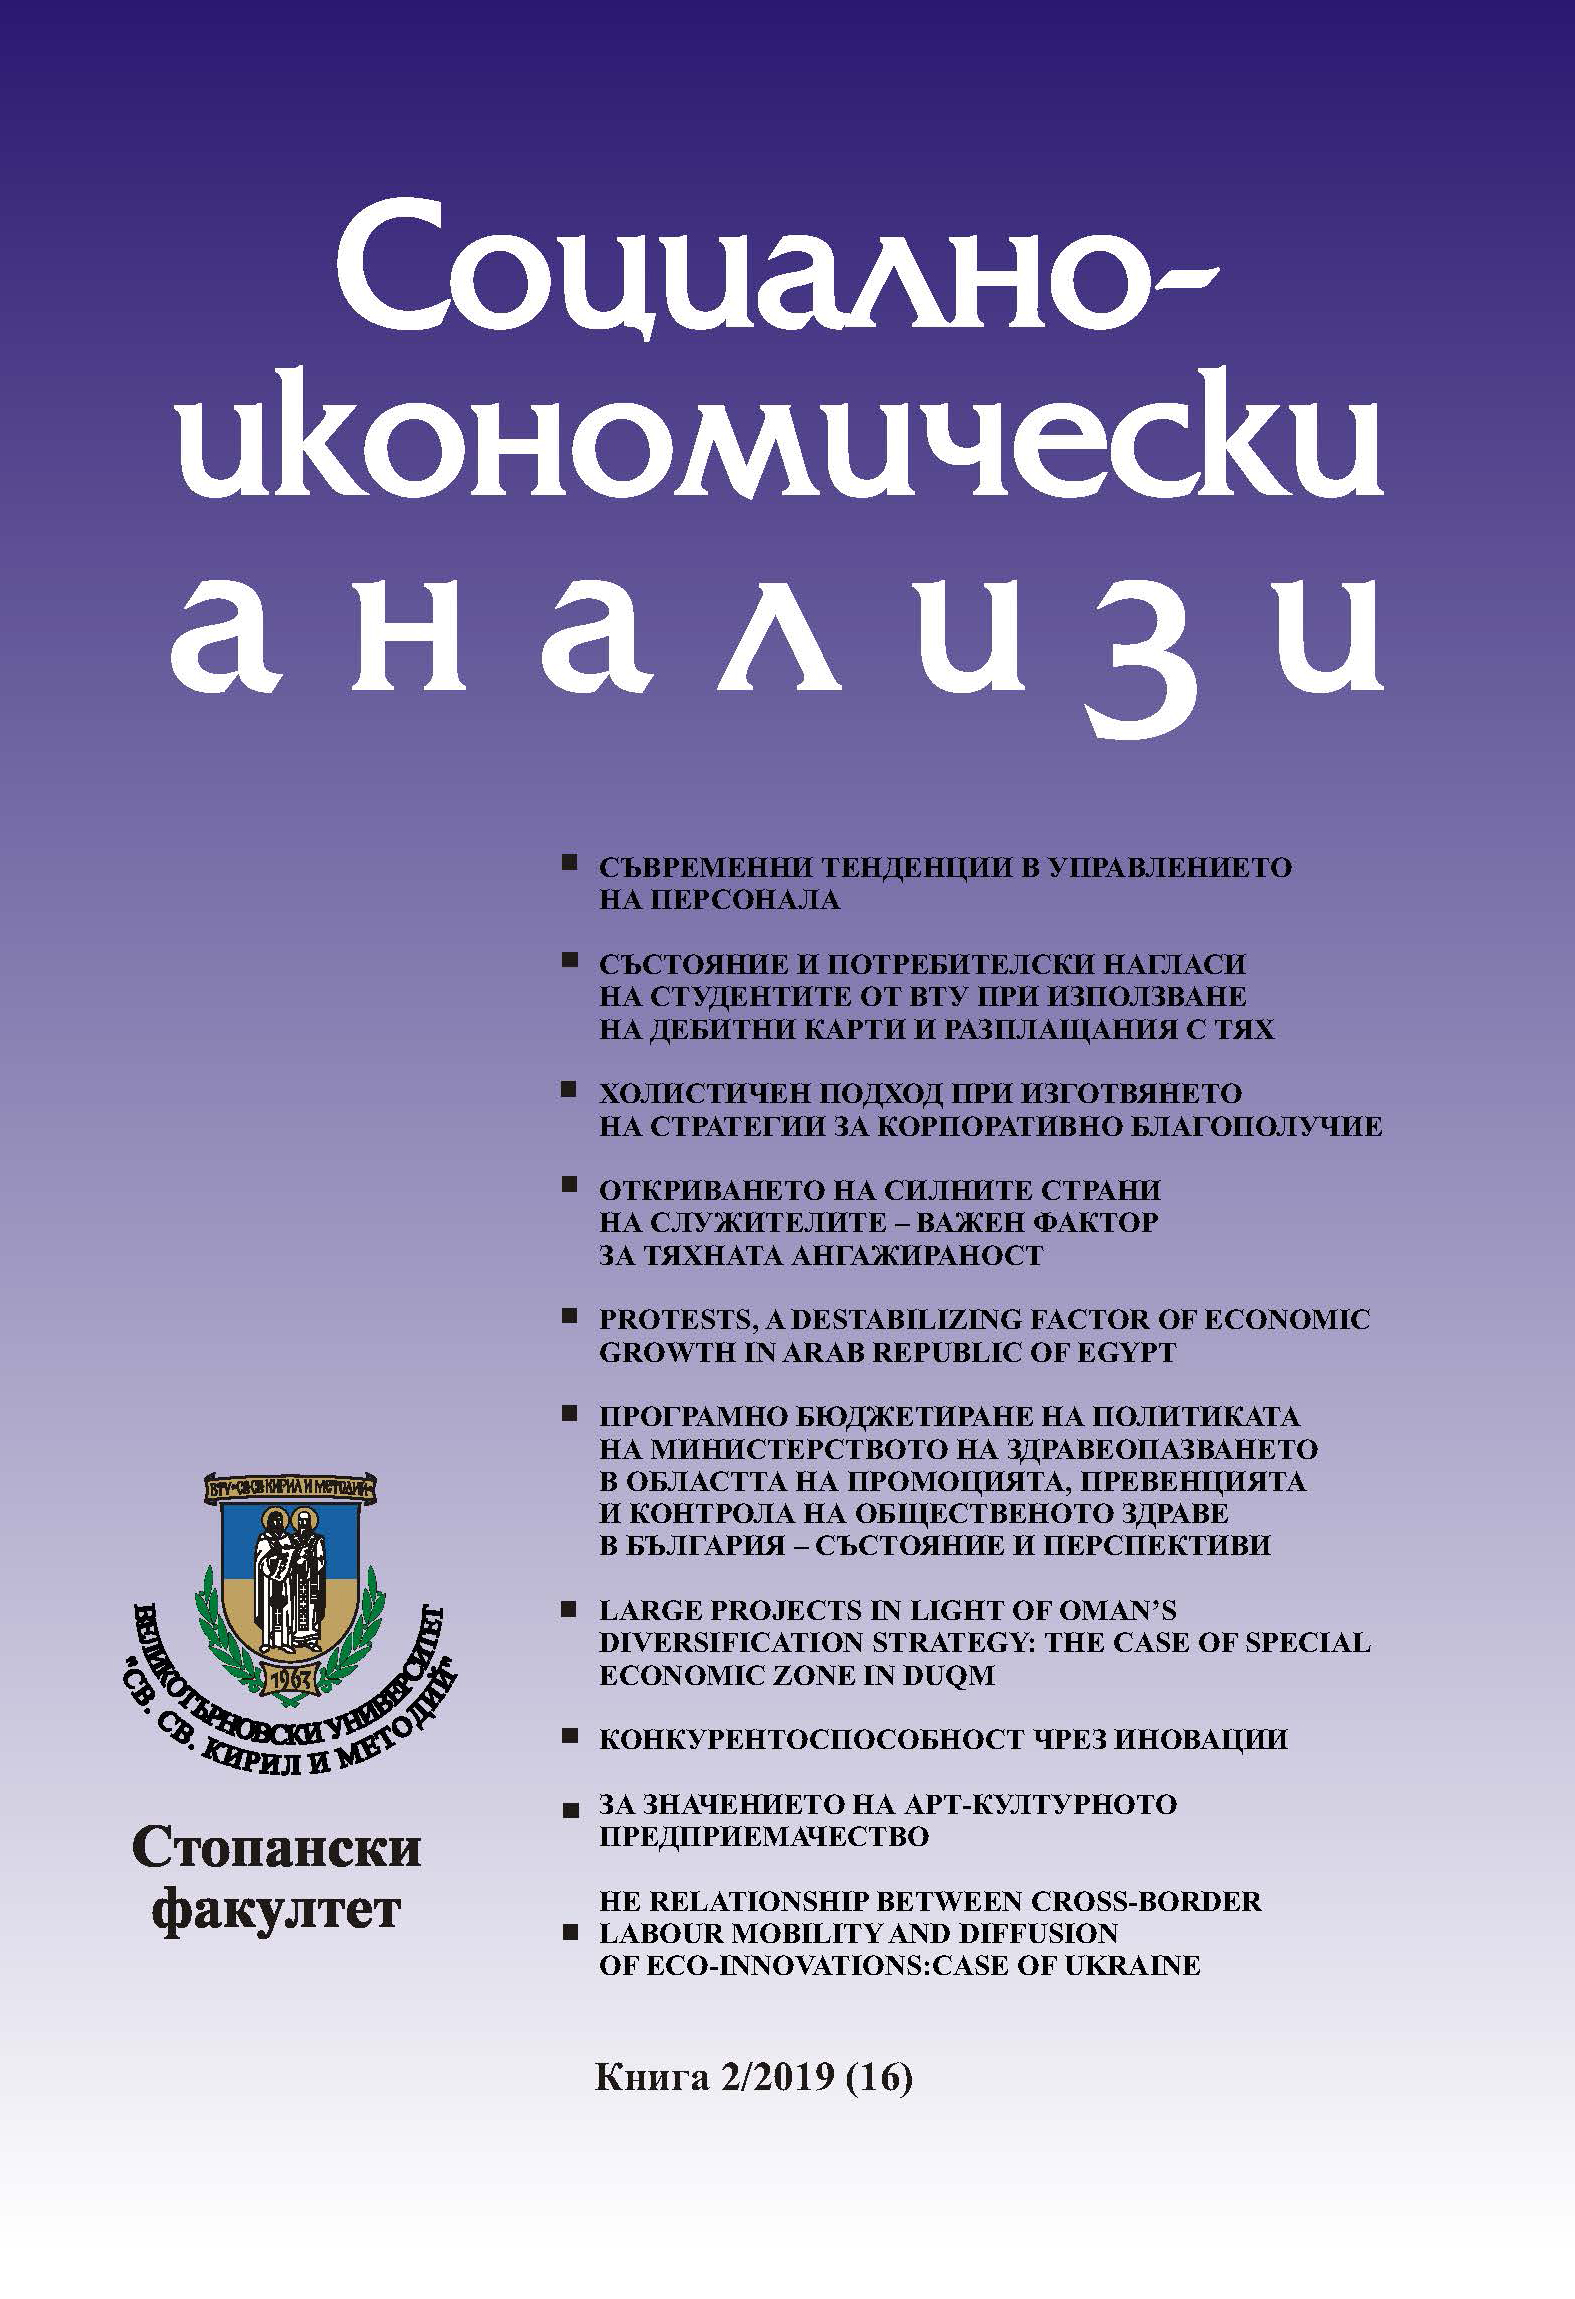 Programme Budgeting of the Ministry of Health Policy in the Field of Promotion, Prevention and Public Health Control in Bulgaria – Condition and Prospects Cover Image